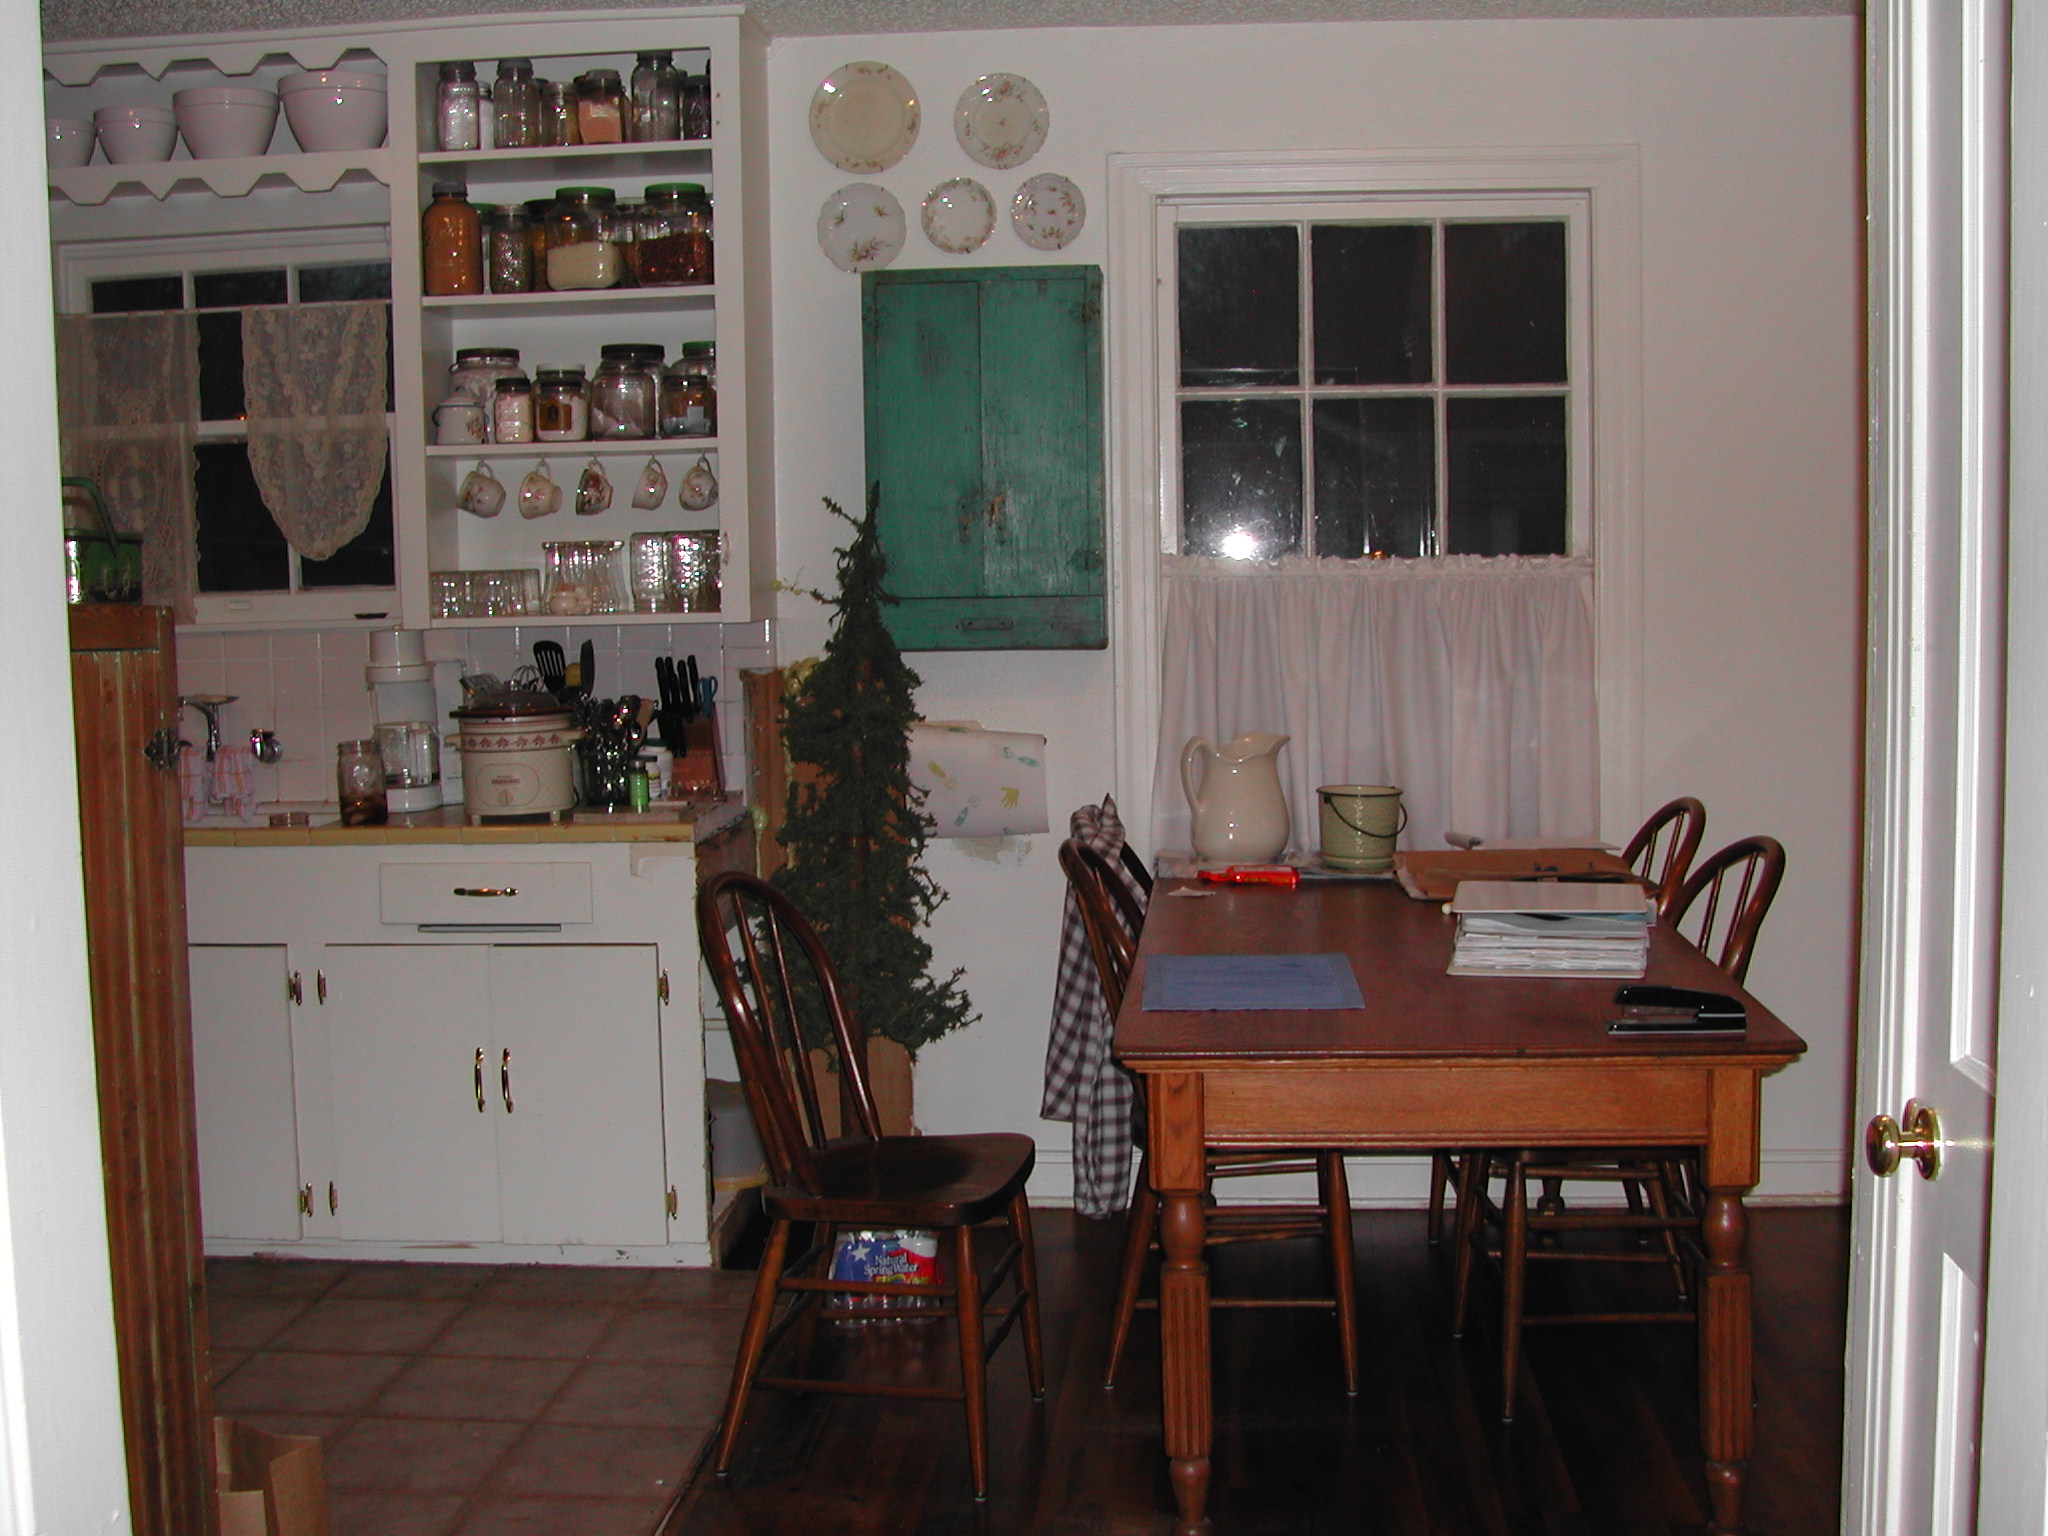 Ruth Avenue kitchen and dining room - before